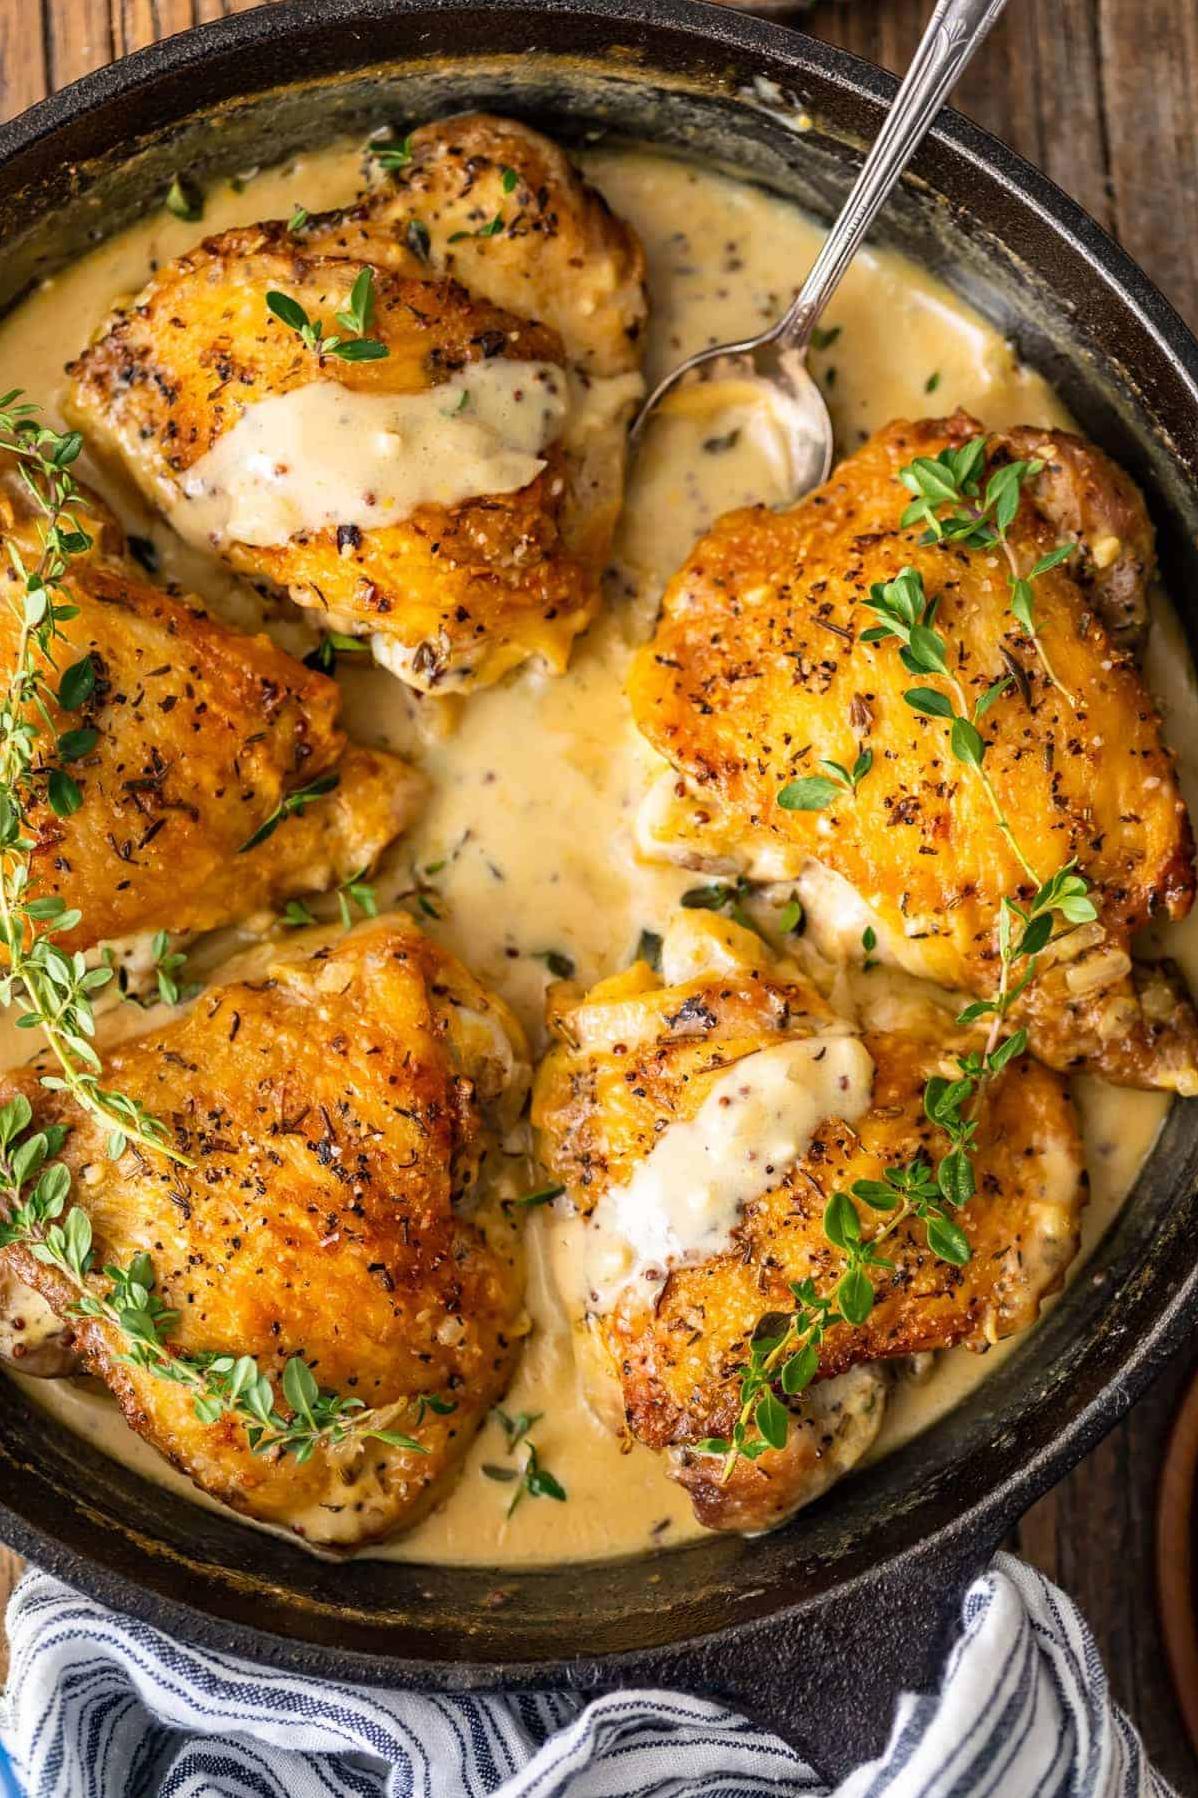 Sure thing! Here are 11 unique photo captions for the Herbed Chicken Dijon With White Wine recipe: